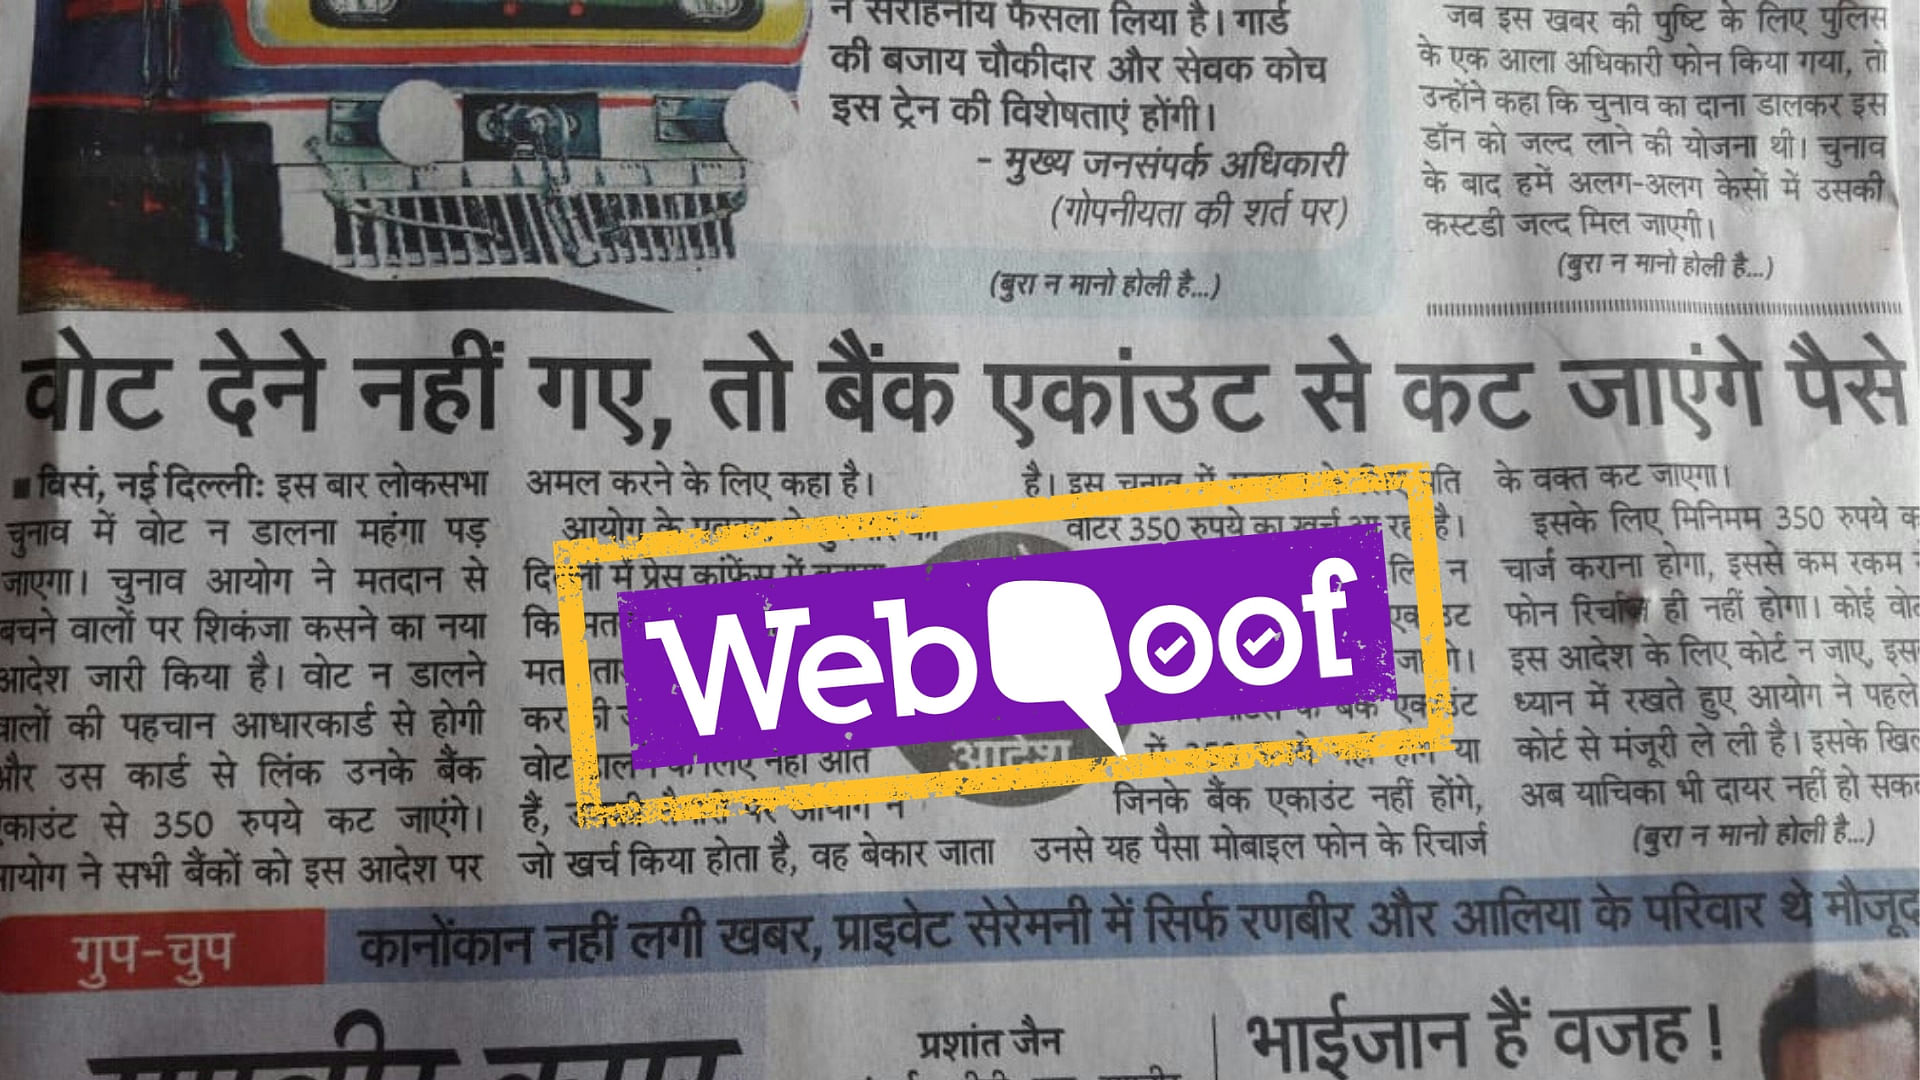 The claim is false and is a satire piece published by the Hindi daily <i>Navbharat Times</i> on the occasion of Holi.